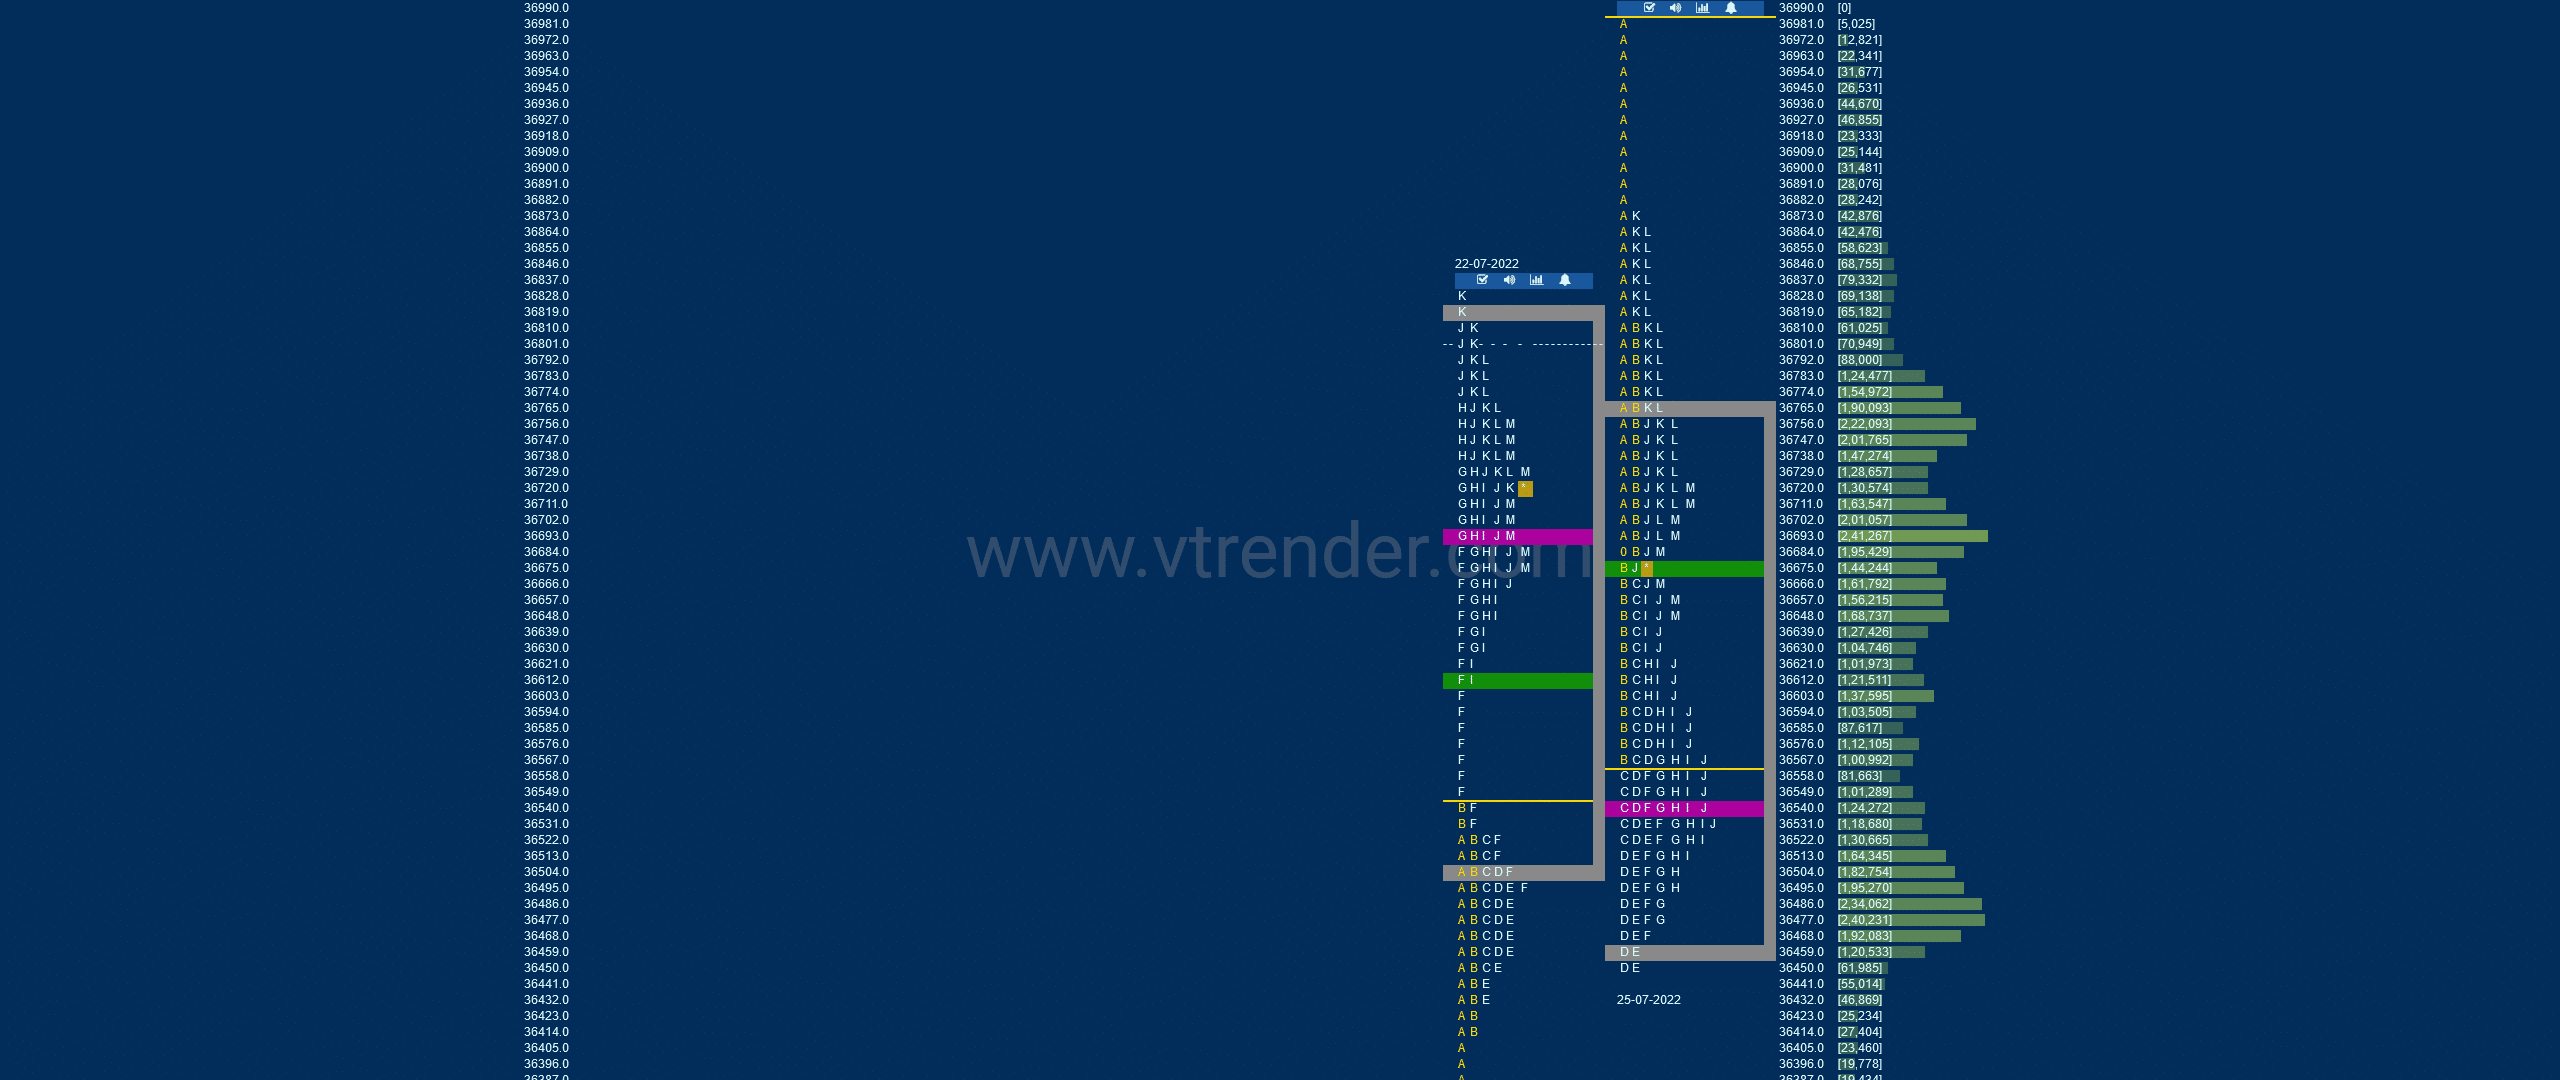 Bnf 17 Market Profile Analysis Dated 25Th Jul 2022 Banknifty Futures, Charts, Day Trading, Intraday Trading, Intraday Trading Strategies, Market Profile, Market Profile Trading Strategies, Nifty Futures, Order Flow Analysis, Support And Resistance, Technical Analysis, Trading Strategies, Volume Profile Trading